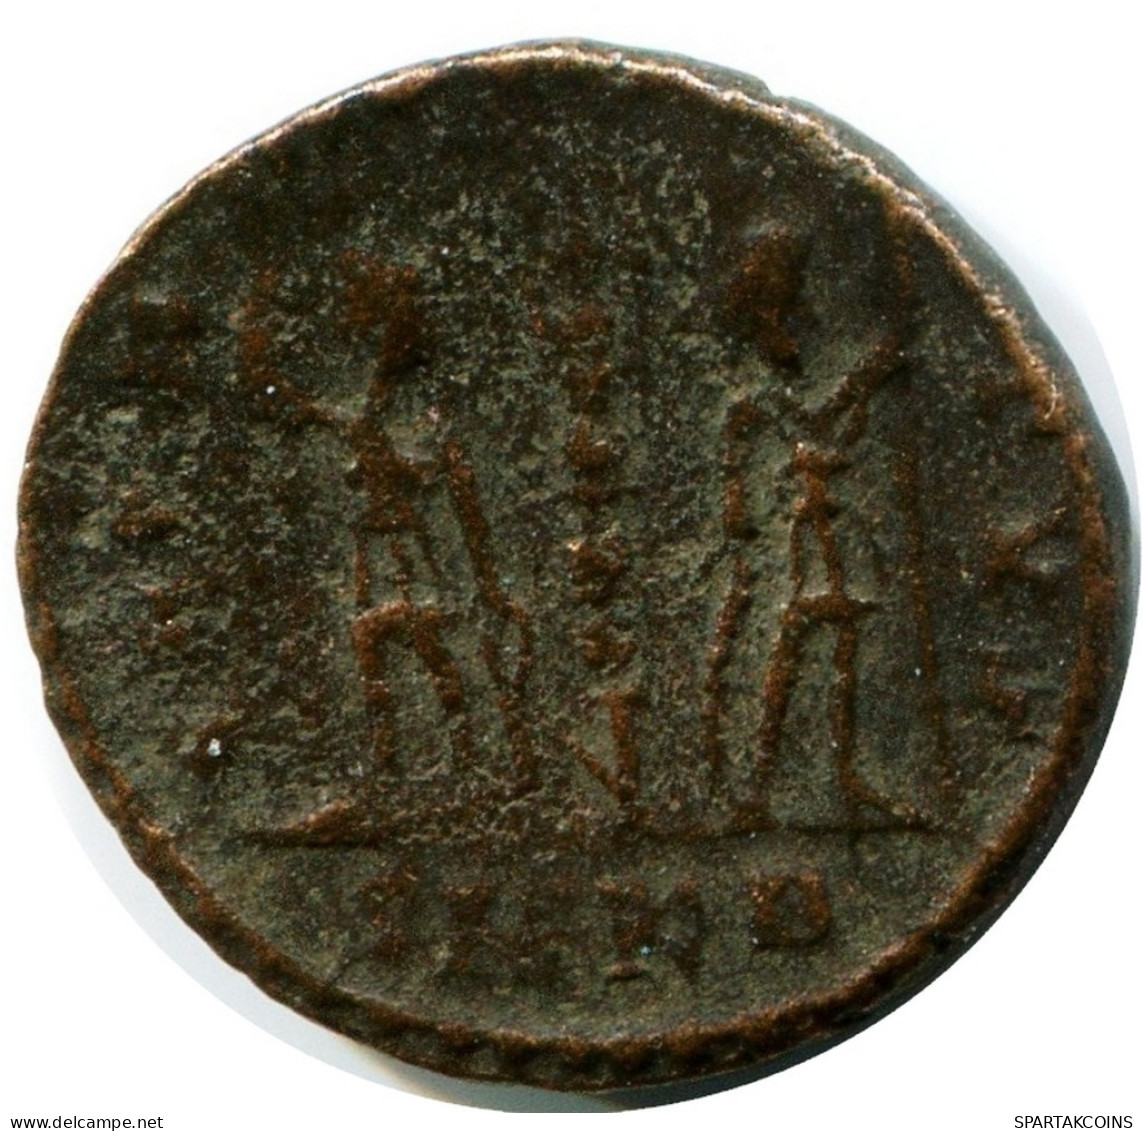 CONSTANS MINTED IN CYZICUS FOUND IN IHNASYAH HOARD EGYPT #ANC11572.14.E.A - El Impero Christiano (307 / 363)